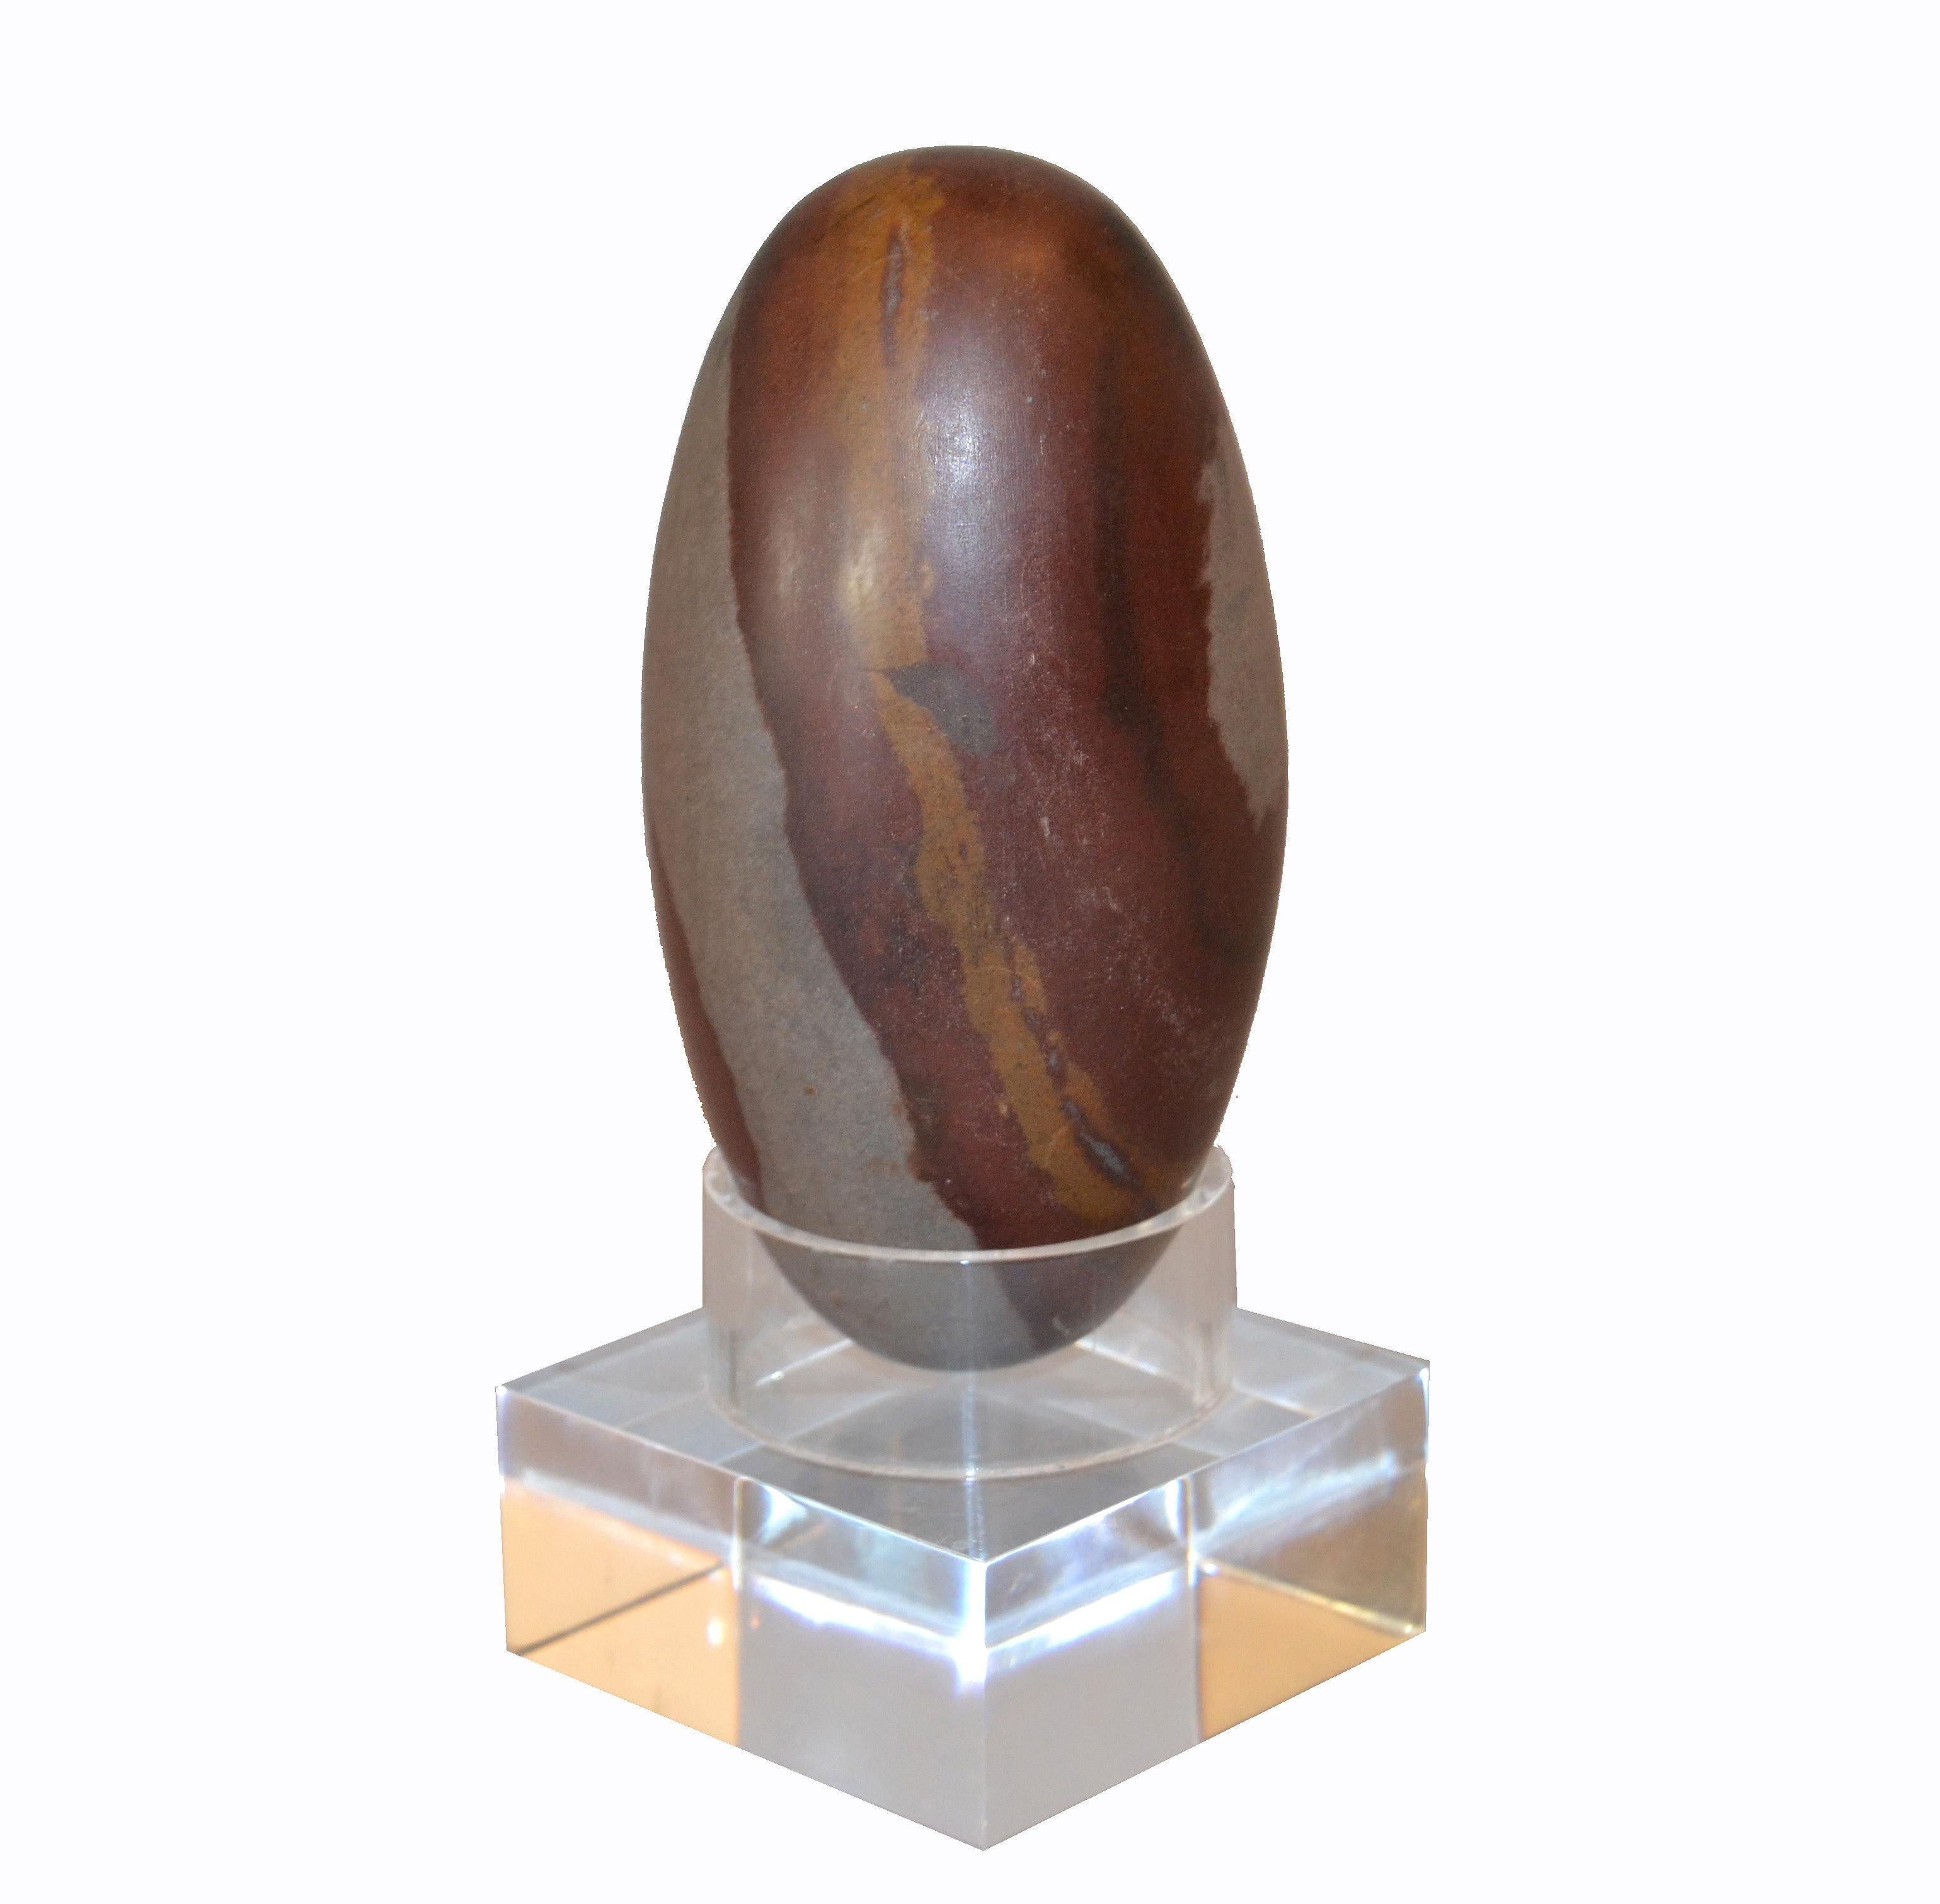 Antique Indian Tantric Shiva Lingam Stone presented on a clear Lucite Stand.
Please not the unique grain pattern of the stone.
Simply Lovely and a great gift for this Holiday Season.